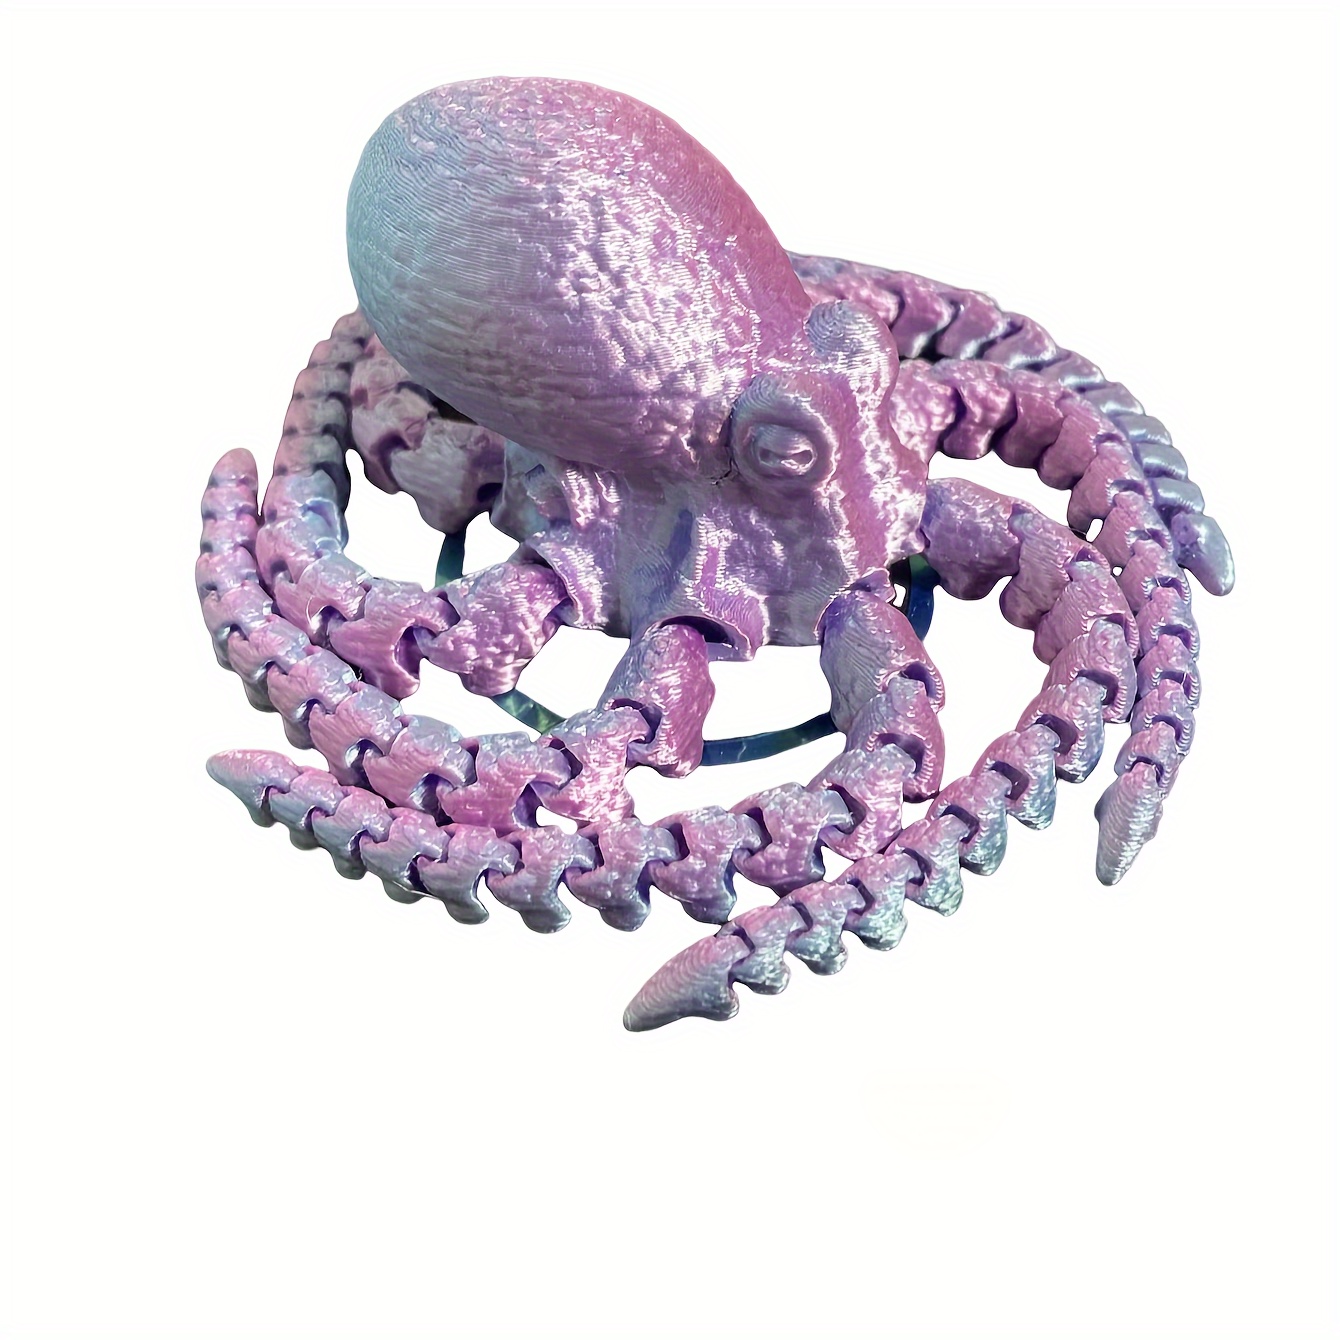 

1pc 3d Printed Colorful Octopus Figurine With Jointed Body, For Bookshelf Living Room Office Cabinet Tabletop Entryway Decor, Room Decor, Home Decor